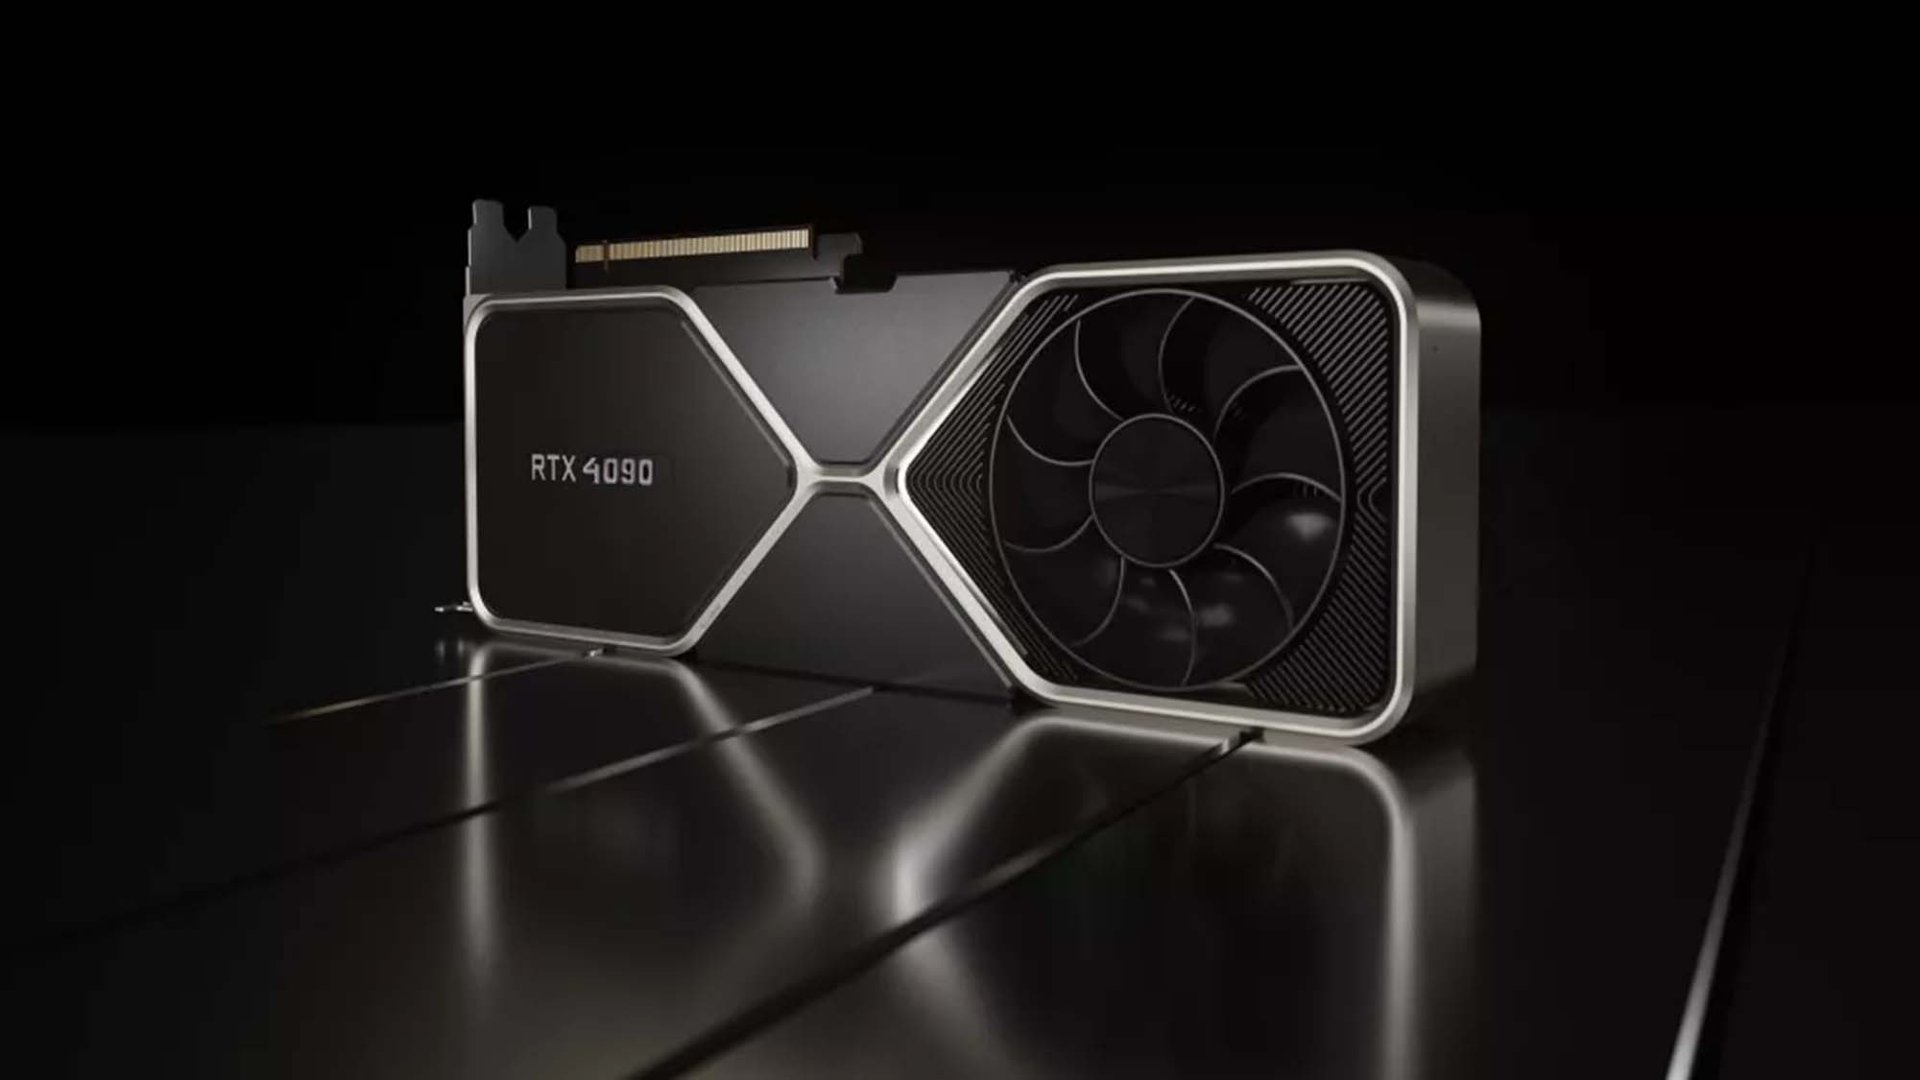 An imaginary RTX 4090 on a black background